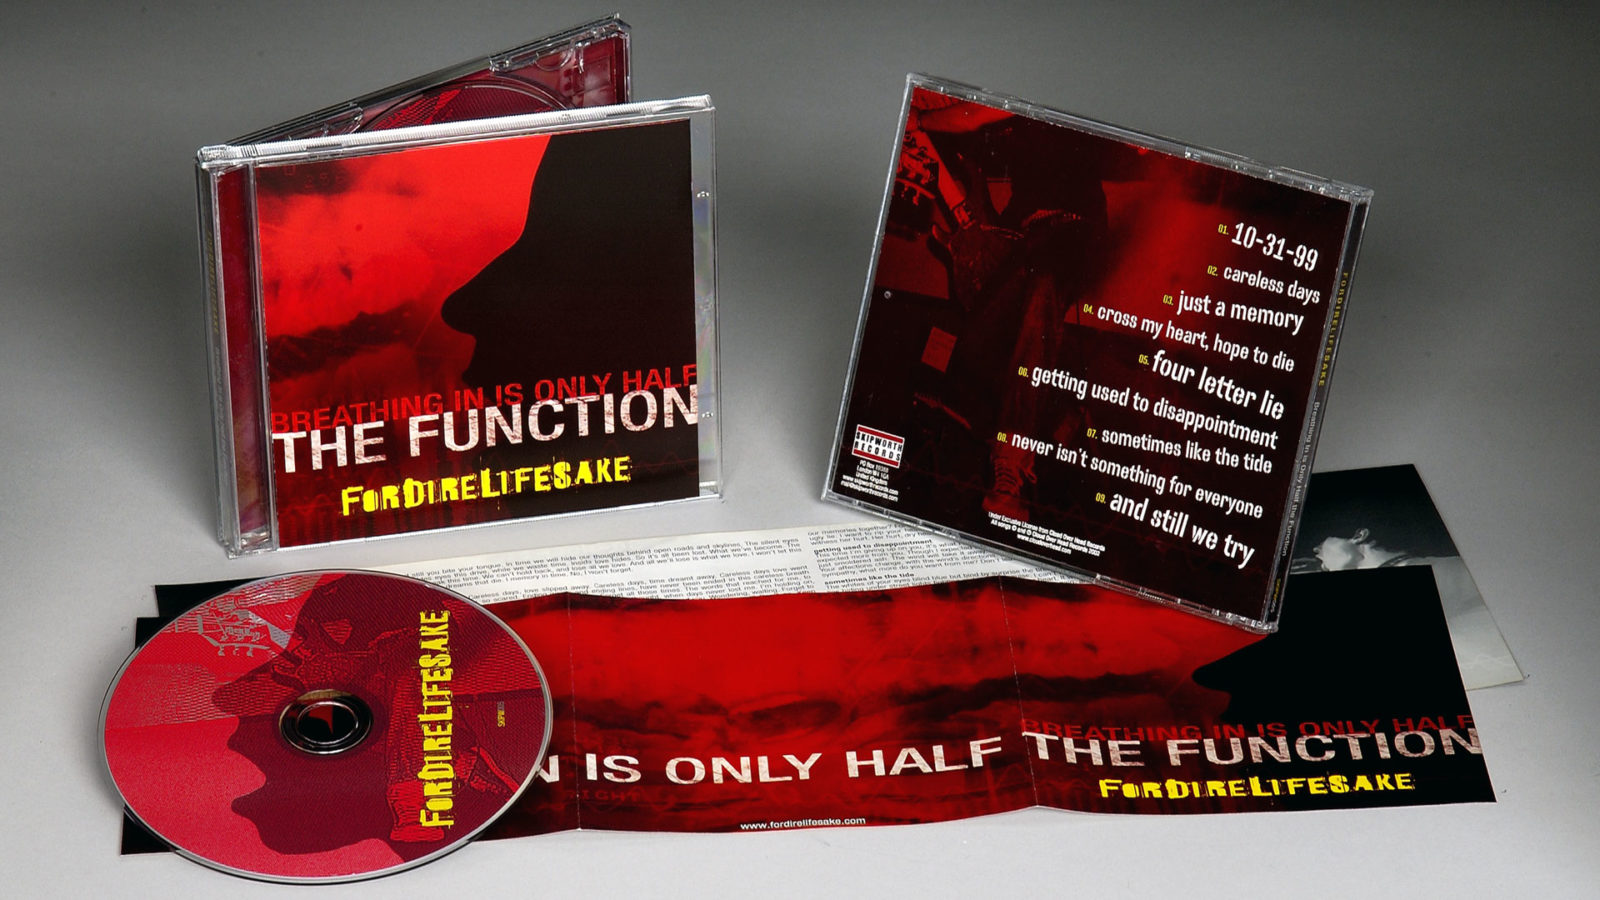 Foredirelifesake – Breathing In is Only Half the Function – Repress